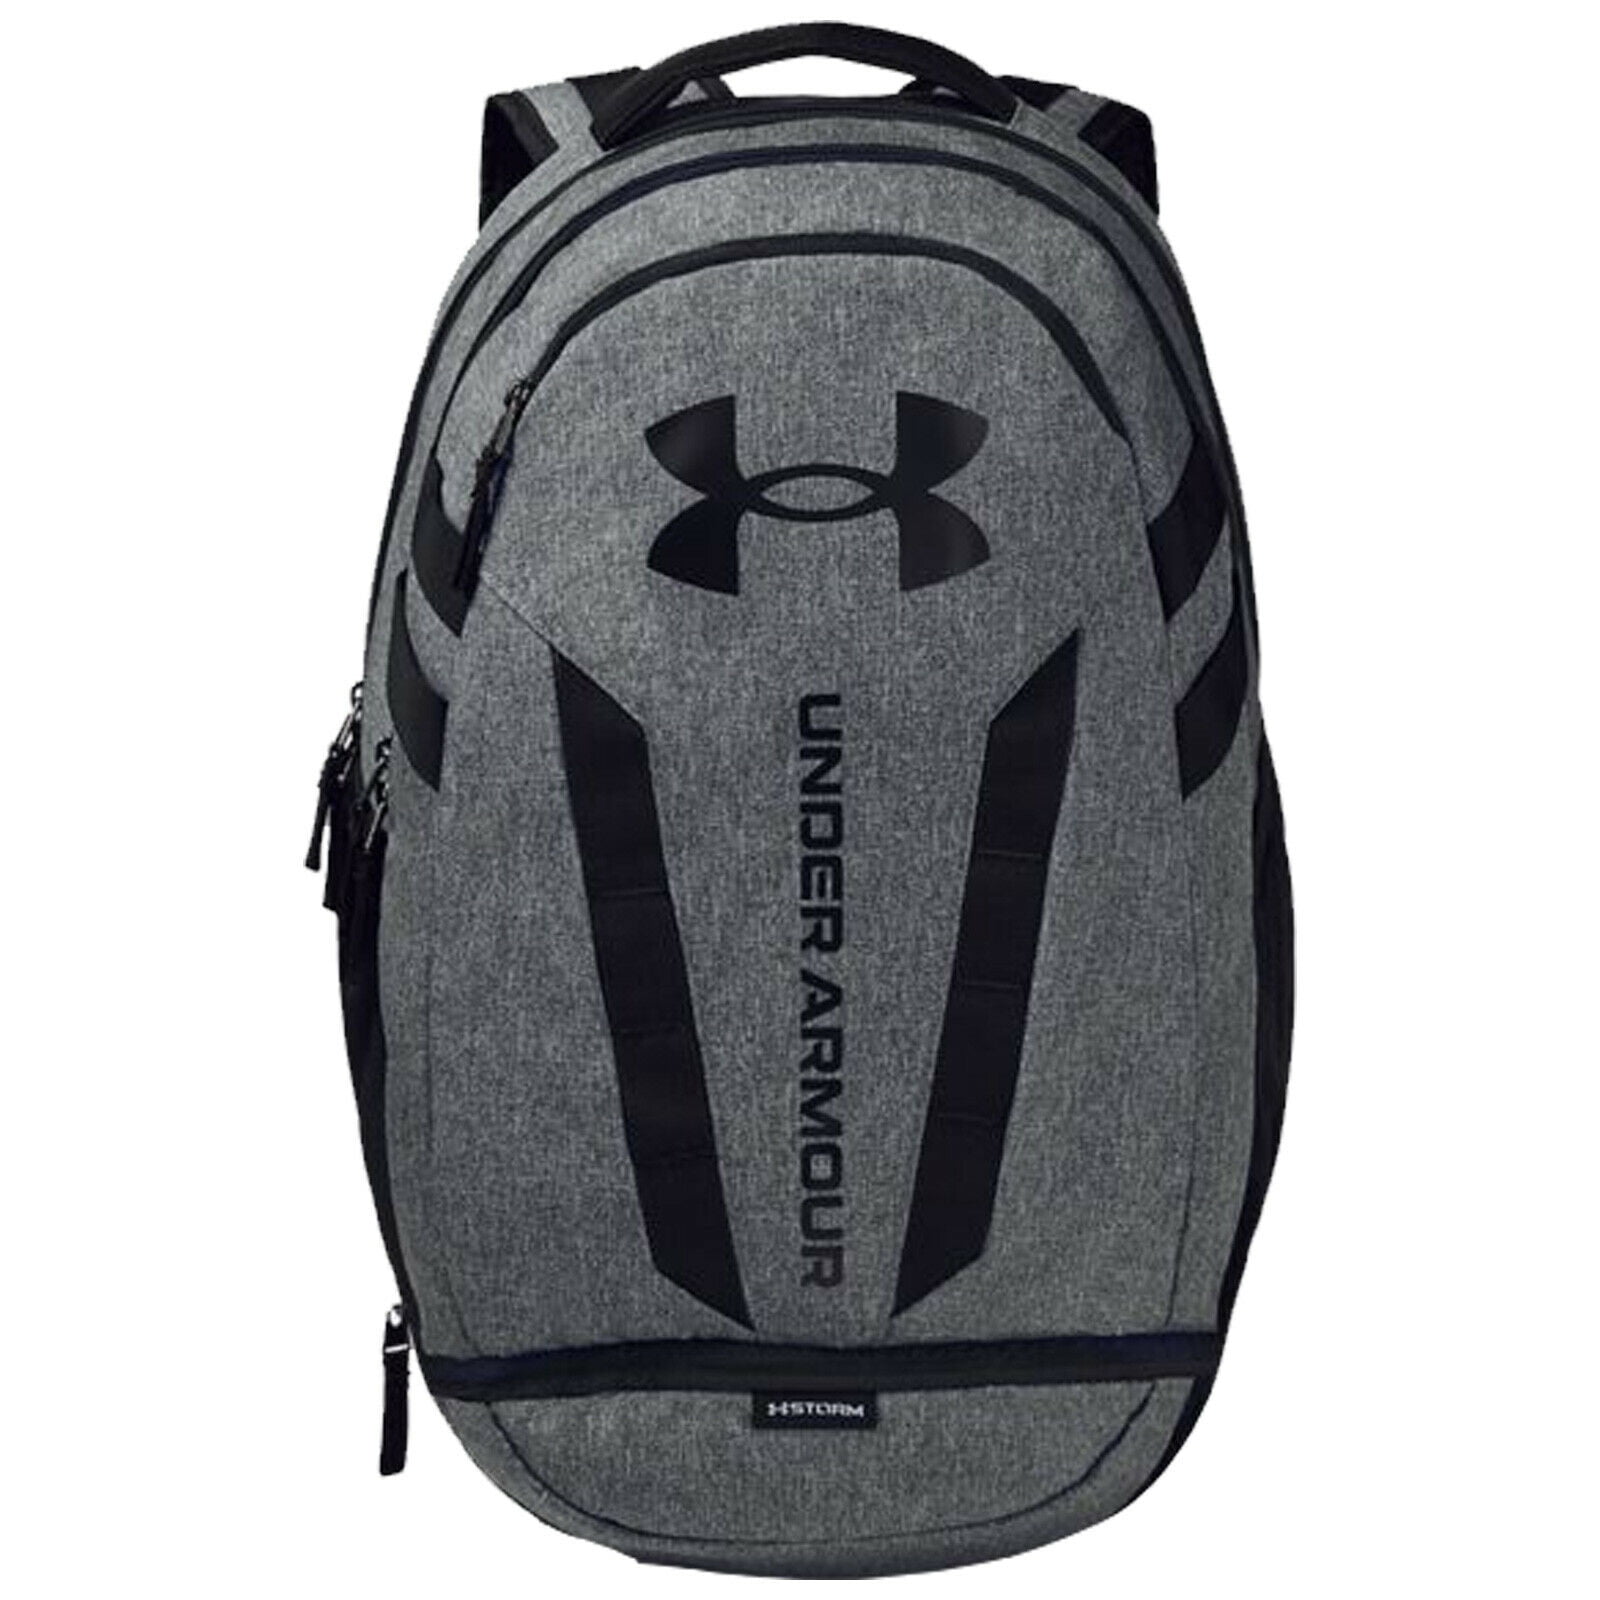 Under Armour Hustle 3.0 Backpack - Graphite - New Star